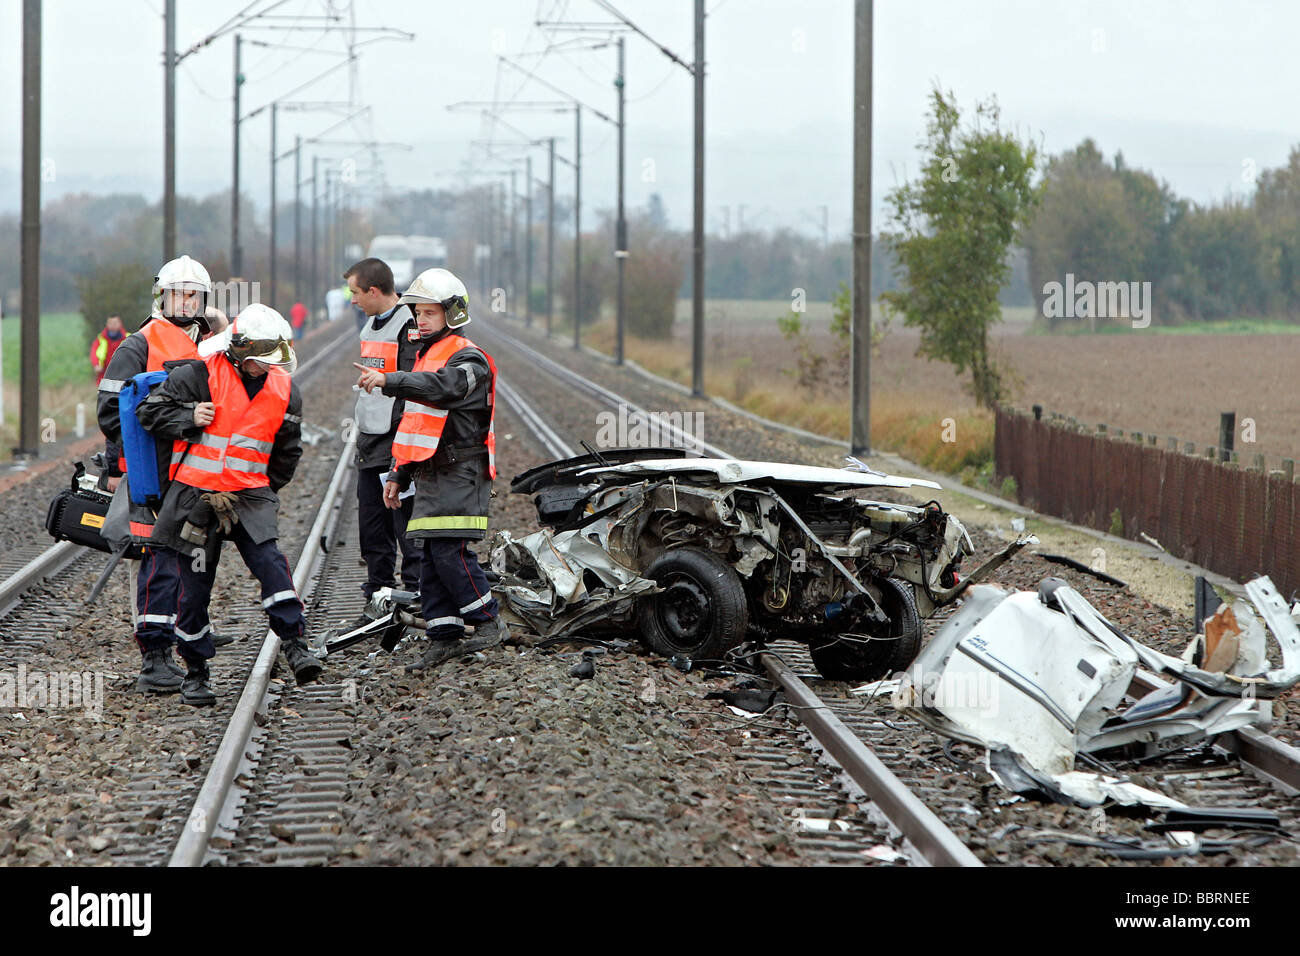 FIREFIGHTERS AT THE SCENE OF A TRAIN ACCIDENT, TGV CRASHED INTO A CAR, ONE PERSON KILLED, TOWN OF CRISSE, SARTHE (72), FRANCE Stock Photo